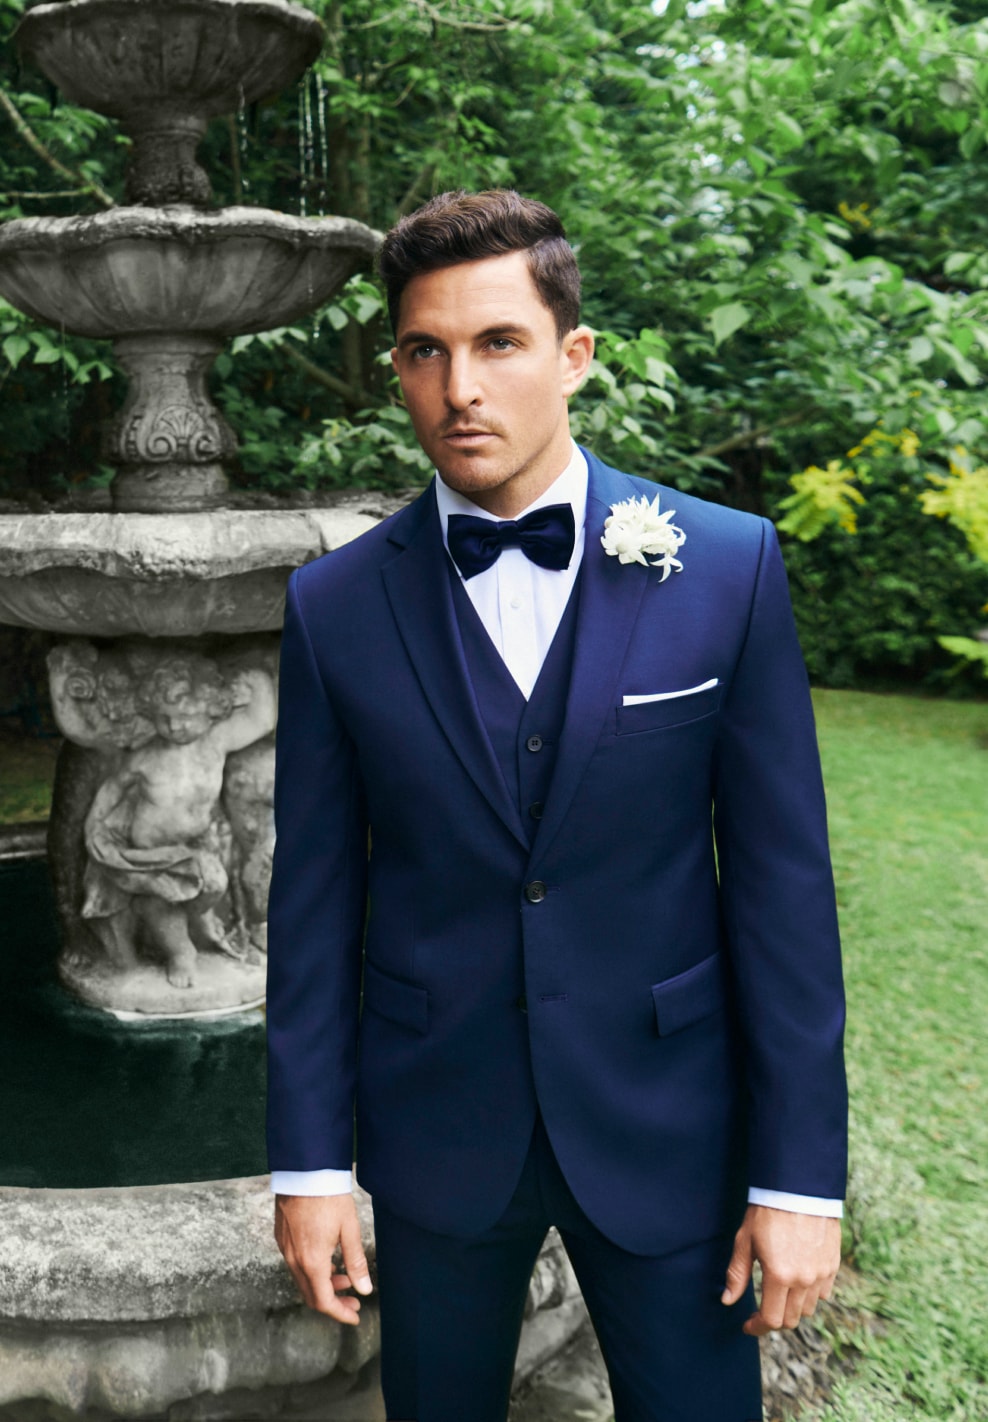 Men's Wedding Suit Ideas, Styles and Attire: Find an Outfit That